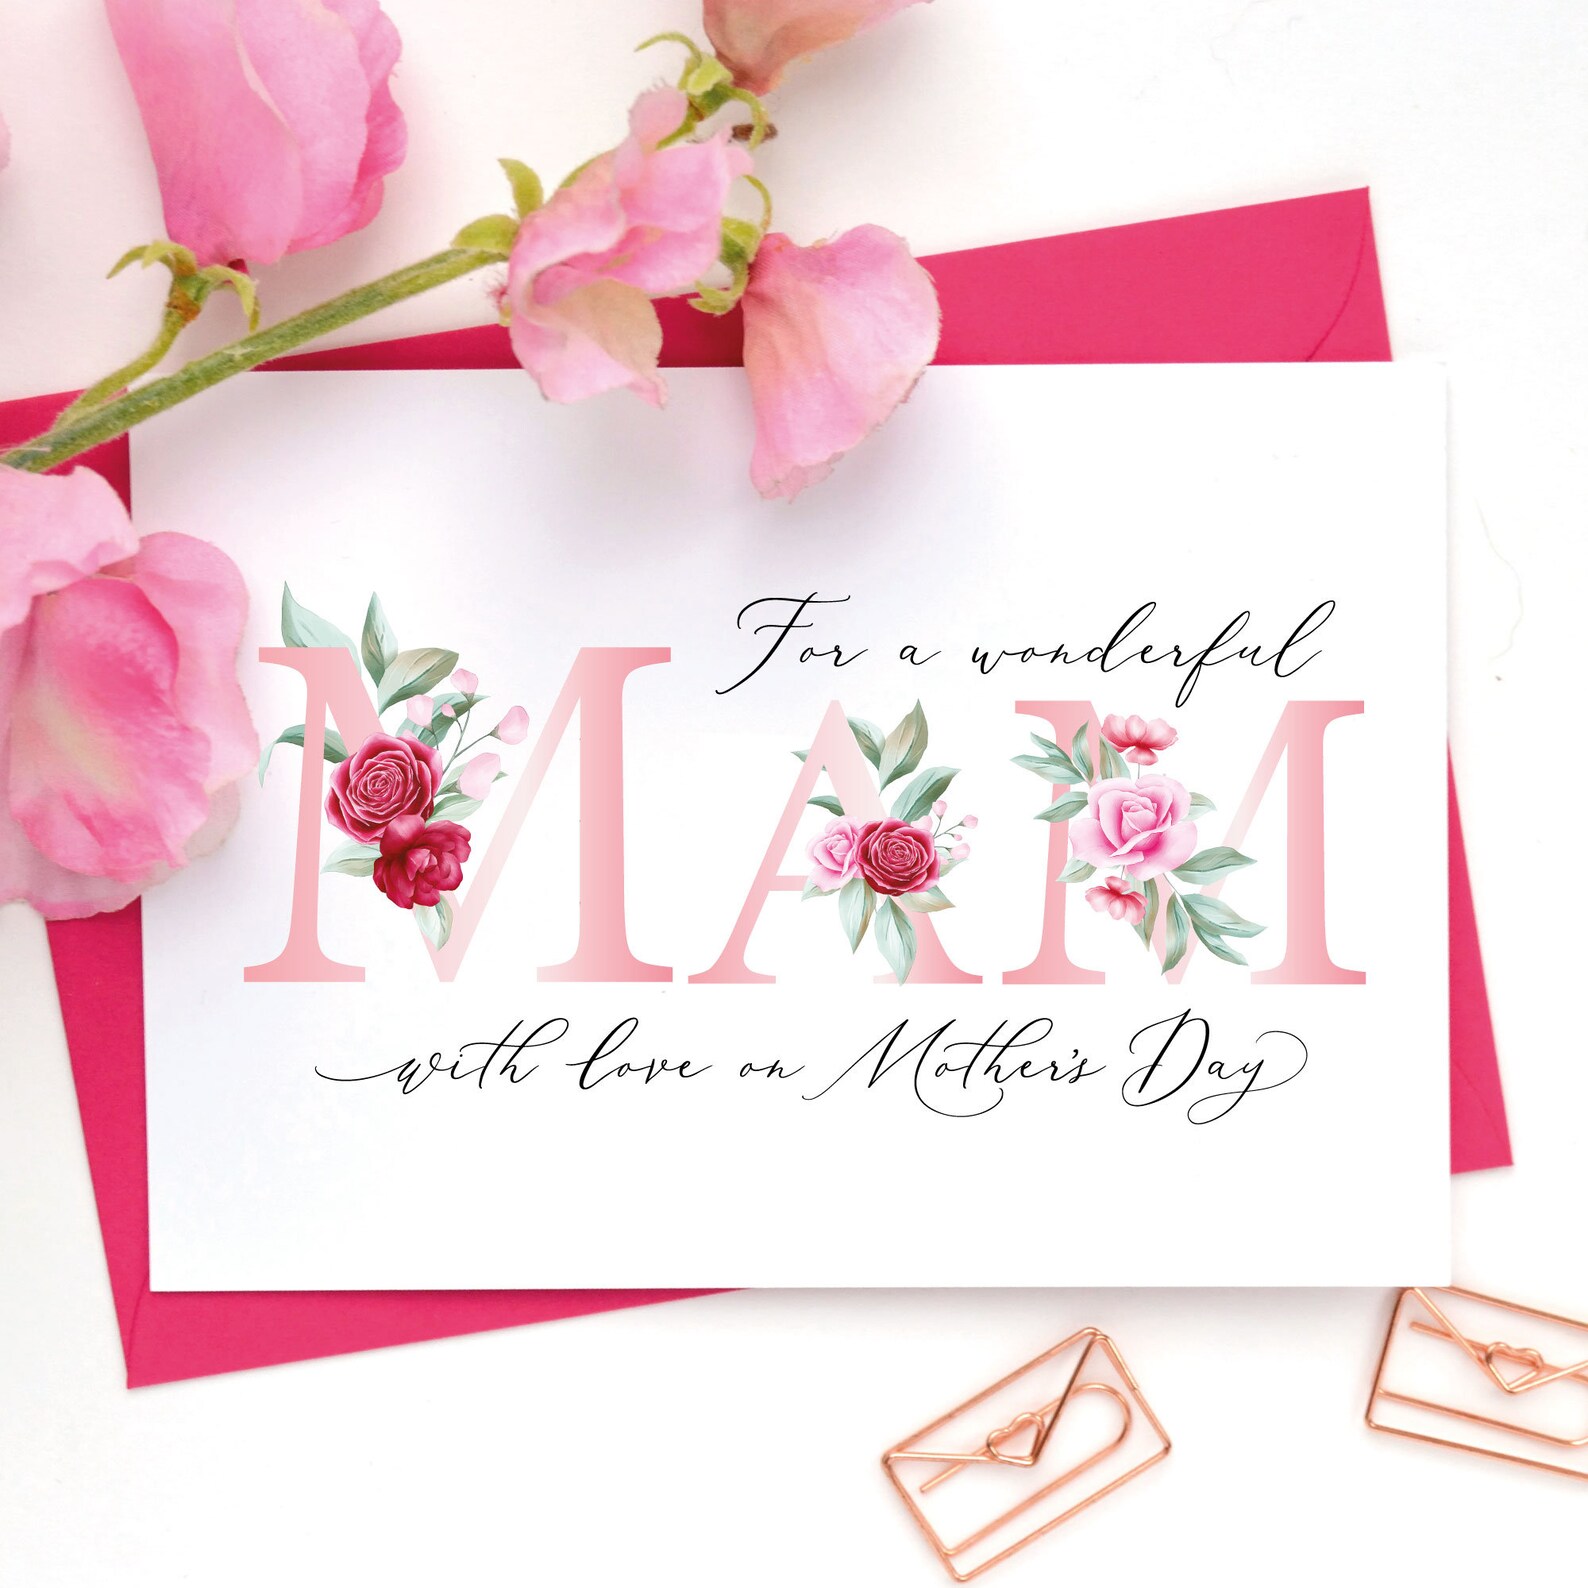 A card with A6 size with pink as the main tone will bring sweetness to her on Mother's Day